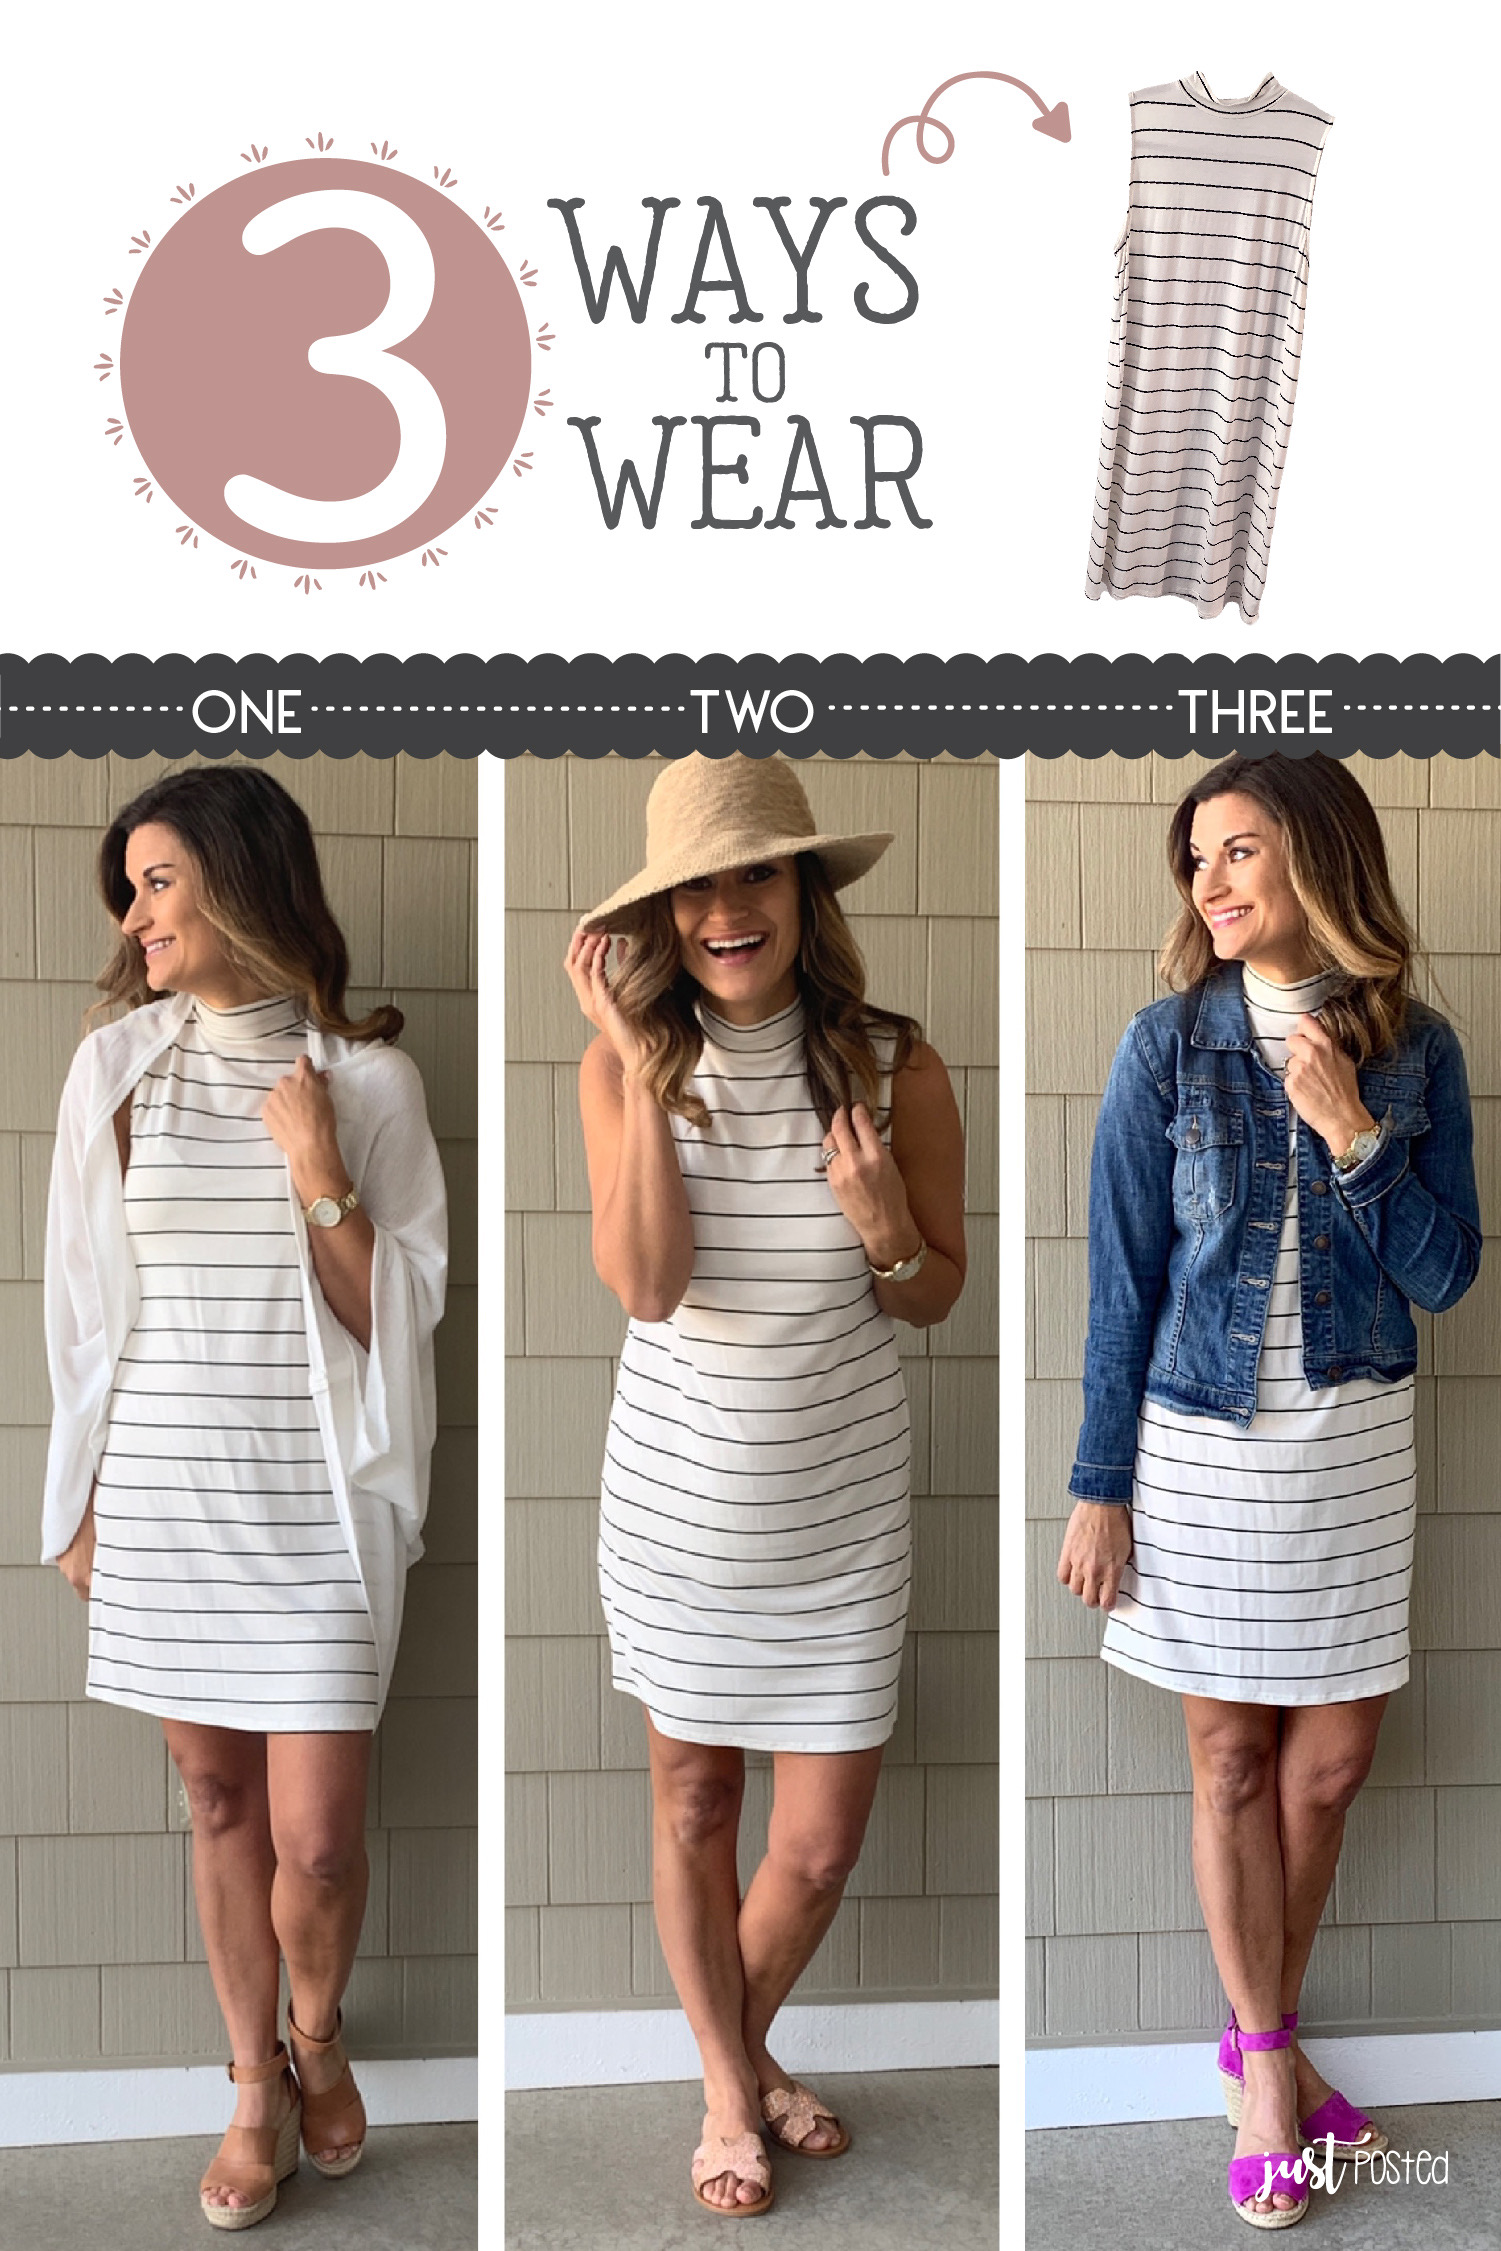 A Spring Capsule Wardrobe from Social Threads – Just Posted